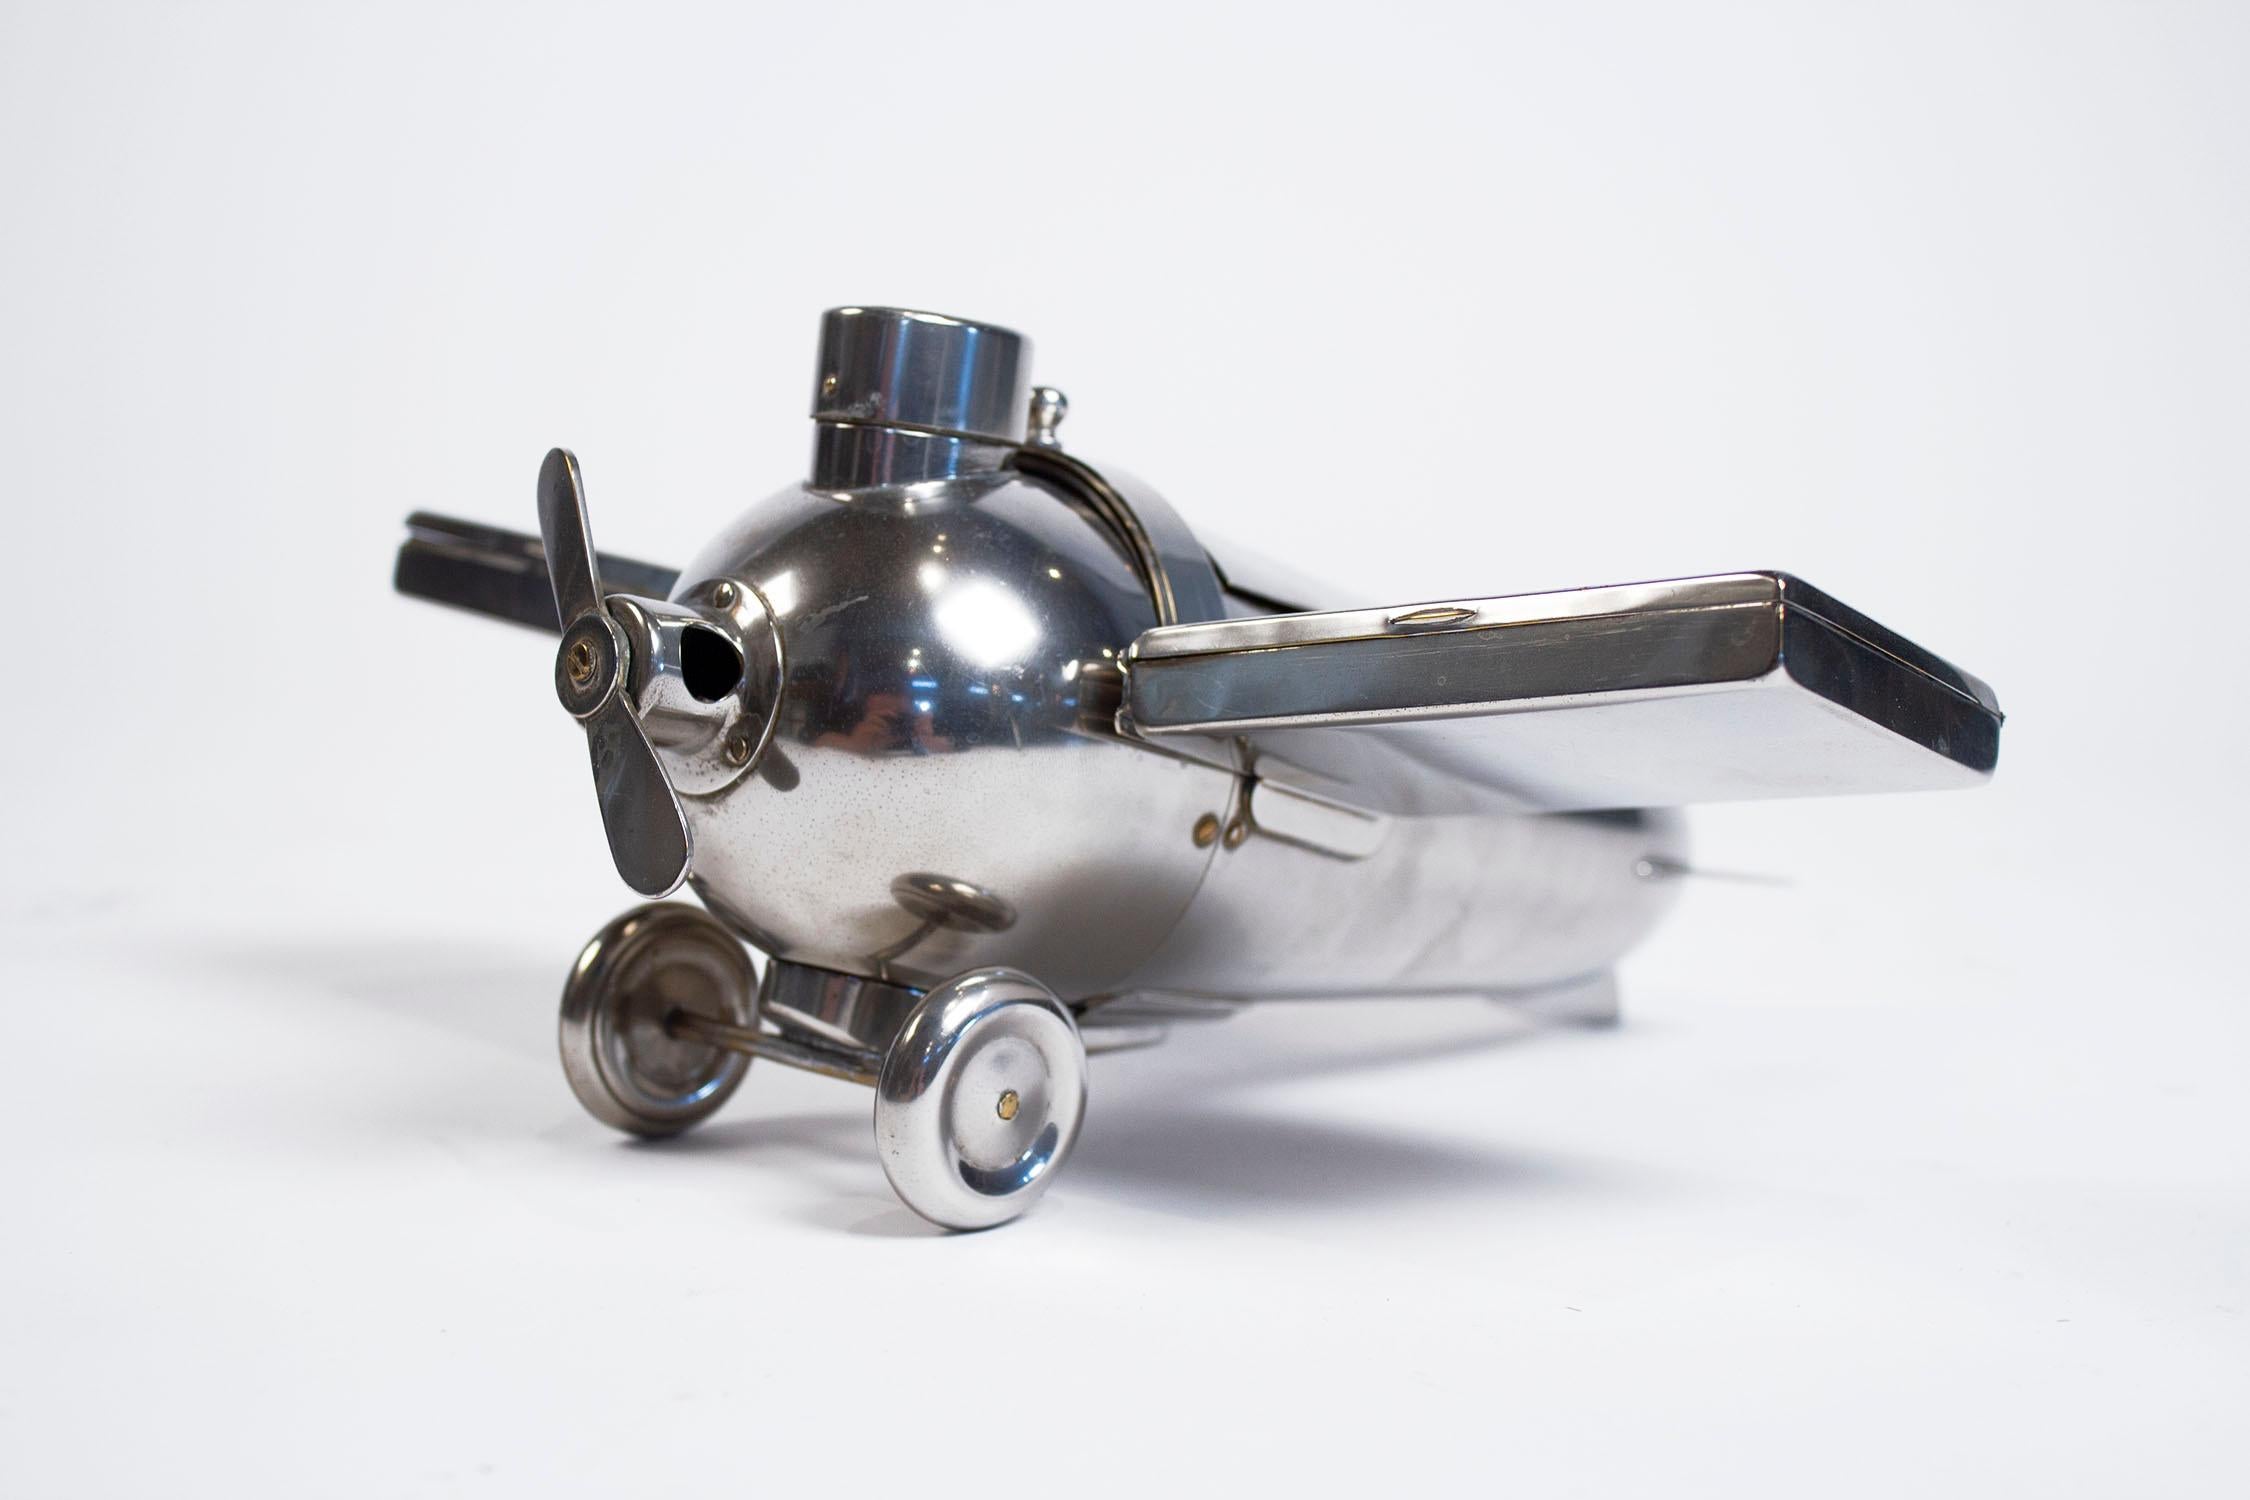 Airplane smokers companion set, silver-plated brass, circa 1930 by J.A. Henckels, Germany. The body of the plane has a hinged cover for cigars or pipe tobacco, or medicinal marijuana,  the detachable wings are cigarette cases, the wheels are a pipe